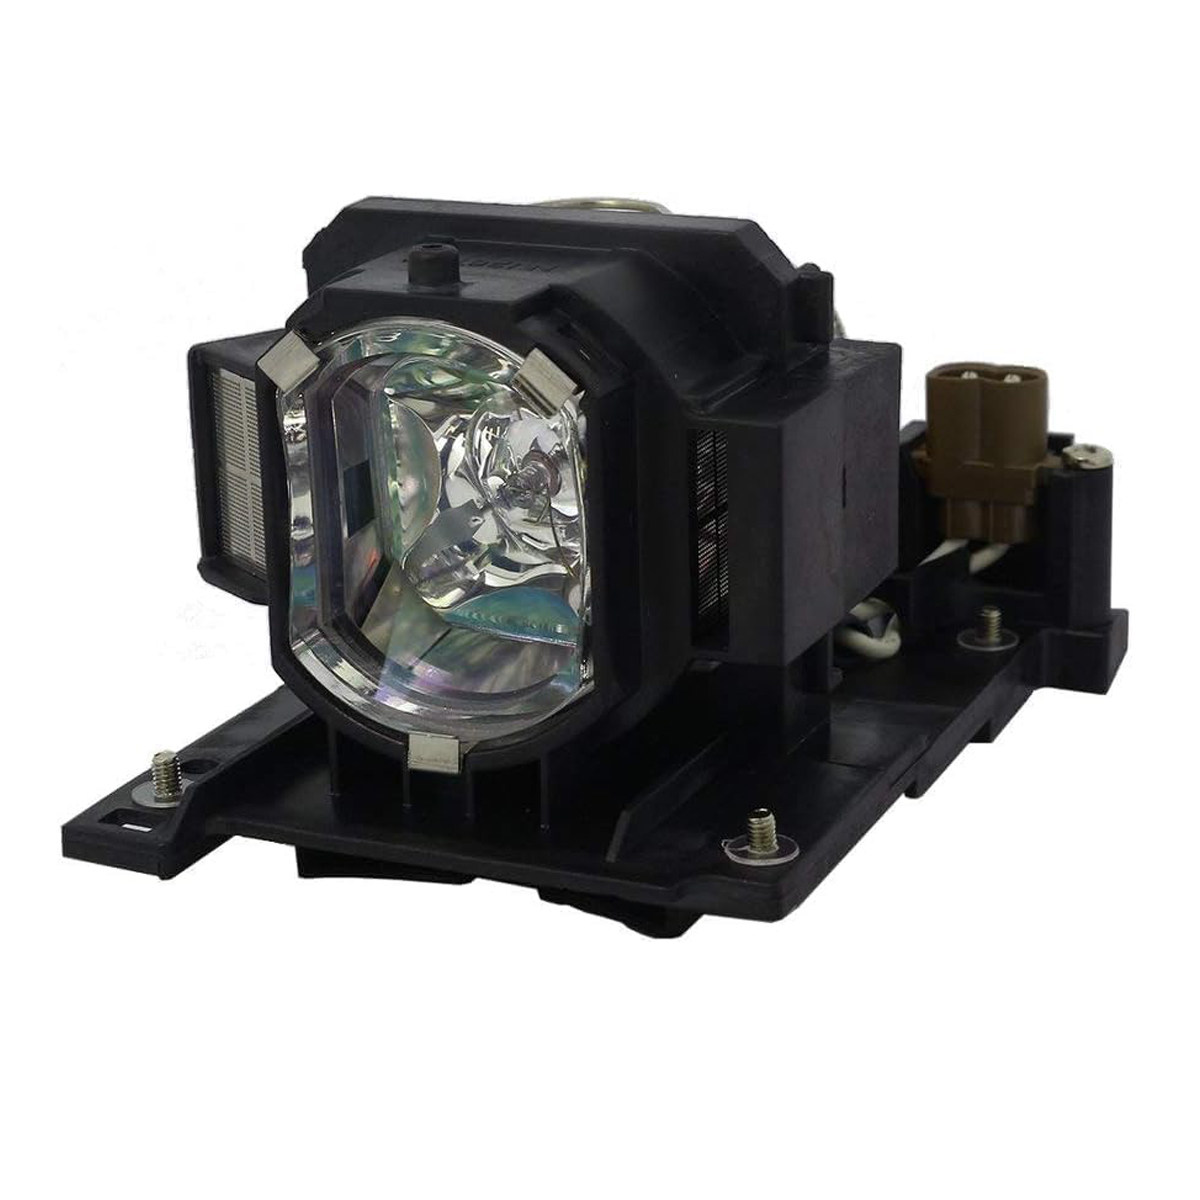 Replacement Projector lamp DT01025 For Hitachi Projector